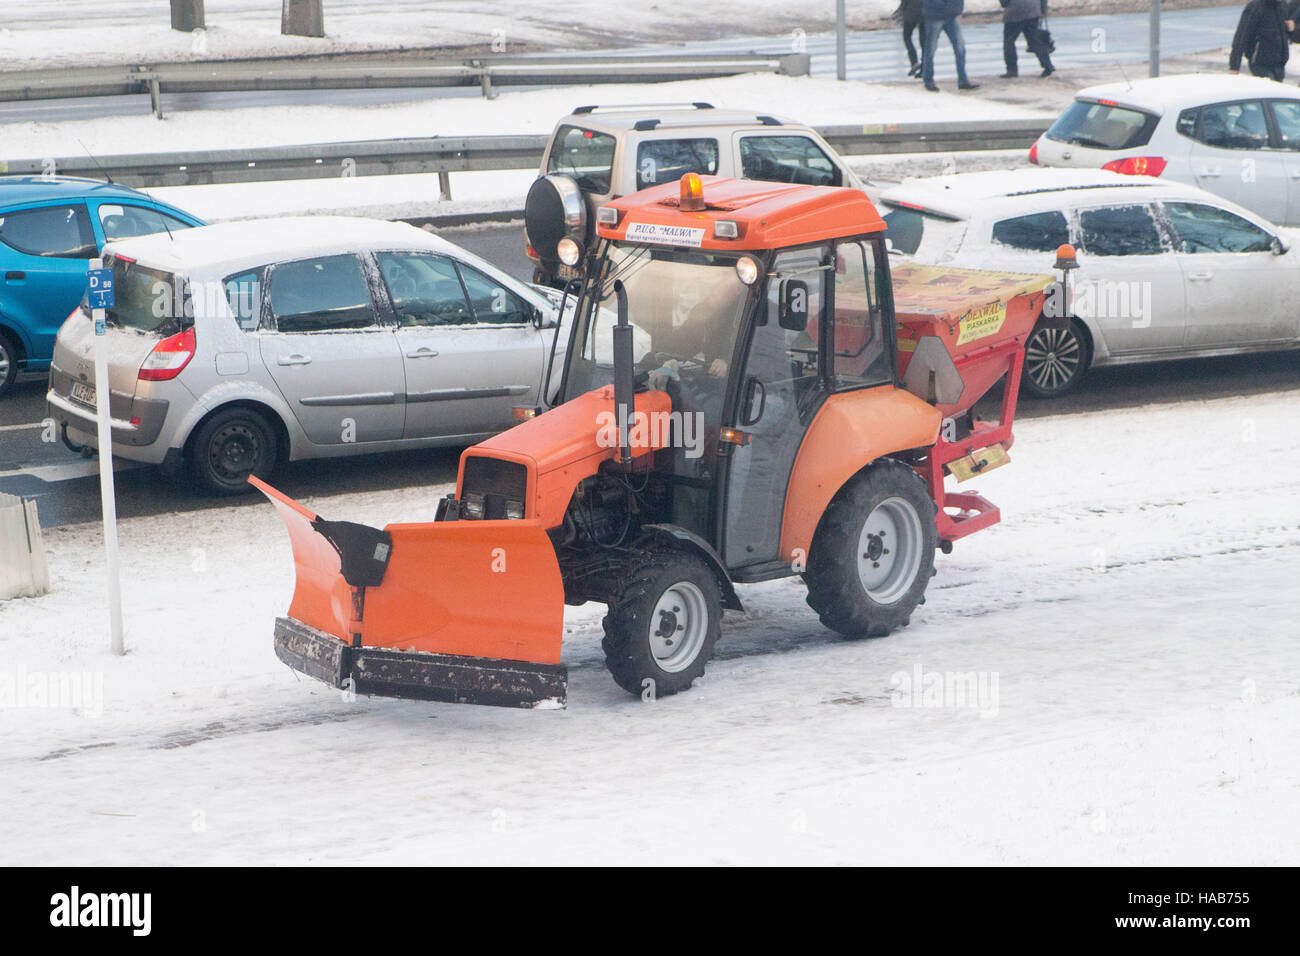 Gdansk, Poland 28 November 2016  Snow plow at work is seen. Heavy snowfall hits Gdansk and all northern Poland. Meteorologists predict snowfall and low temperatures during the next few days. Credit:  Michal Fludra/Alamy Live News Stock Photo